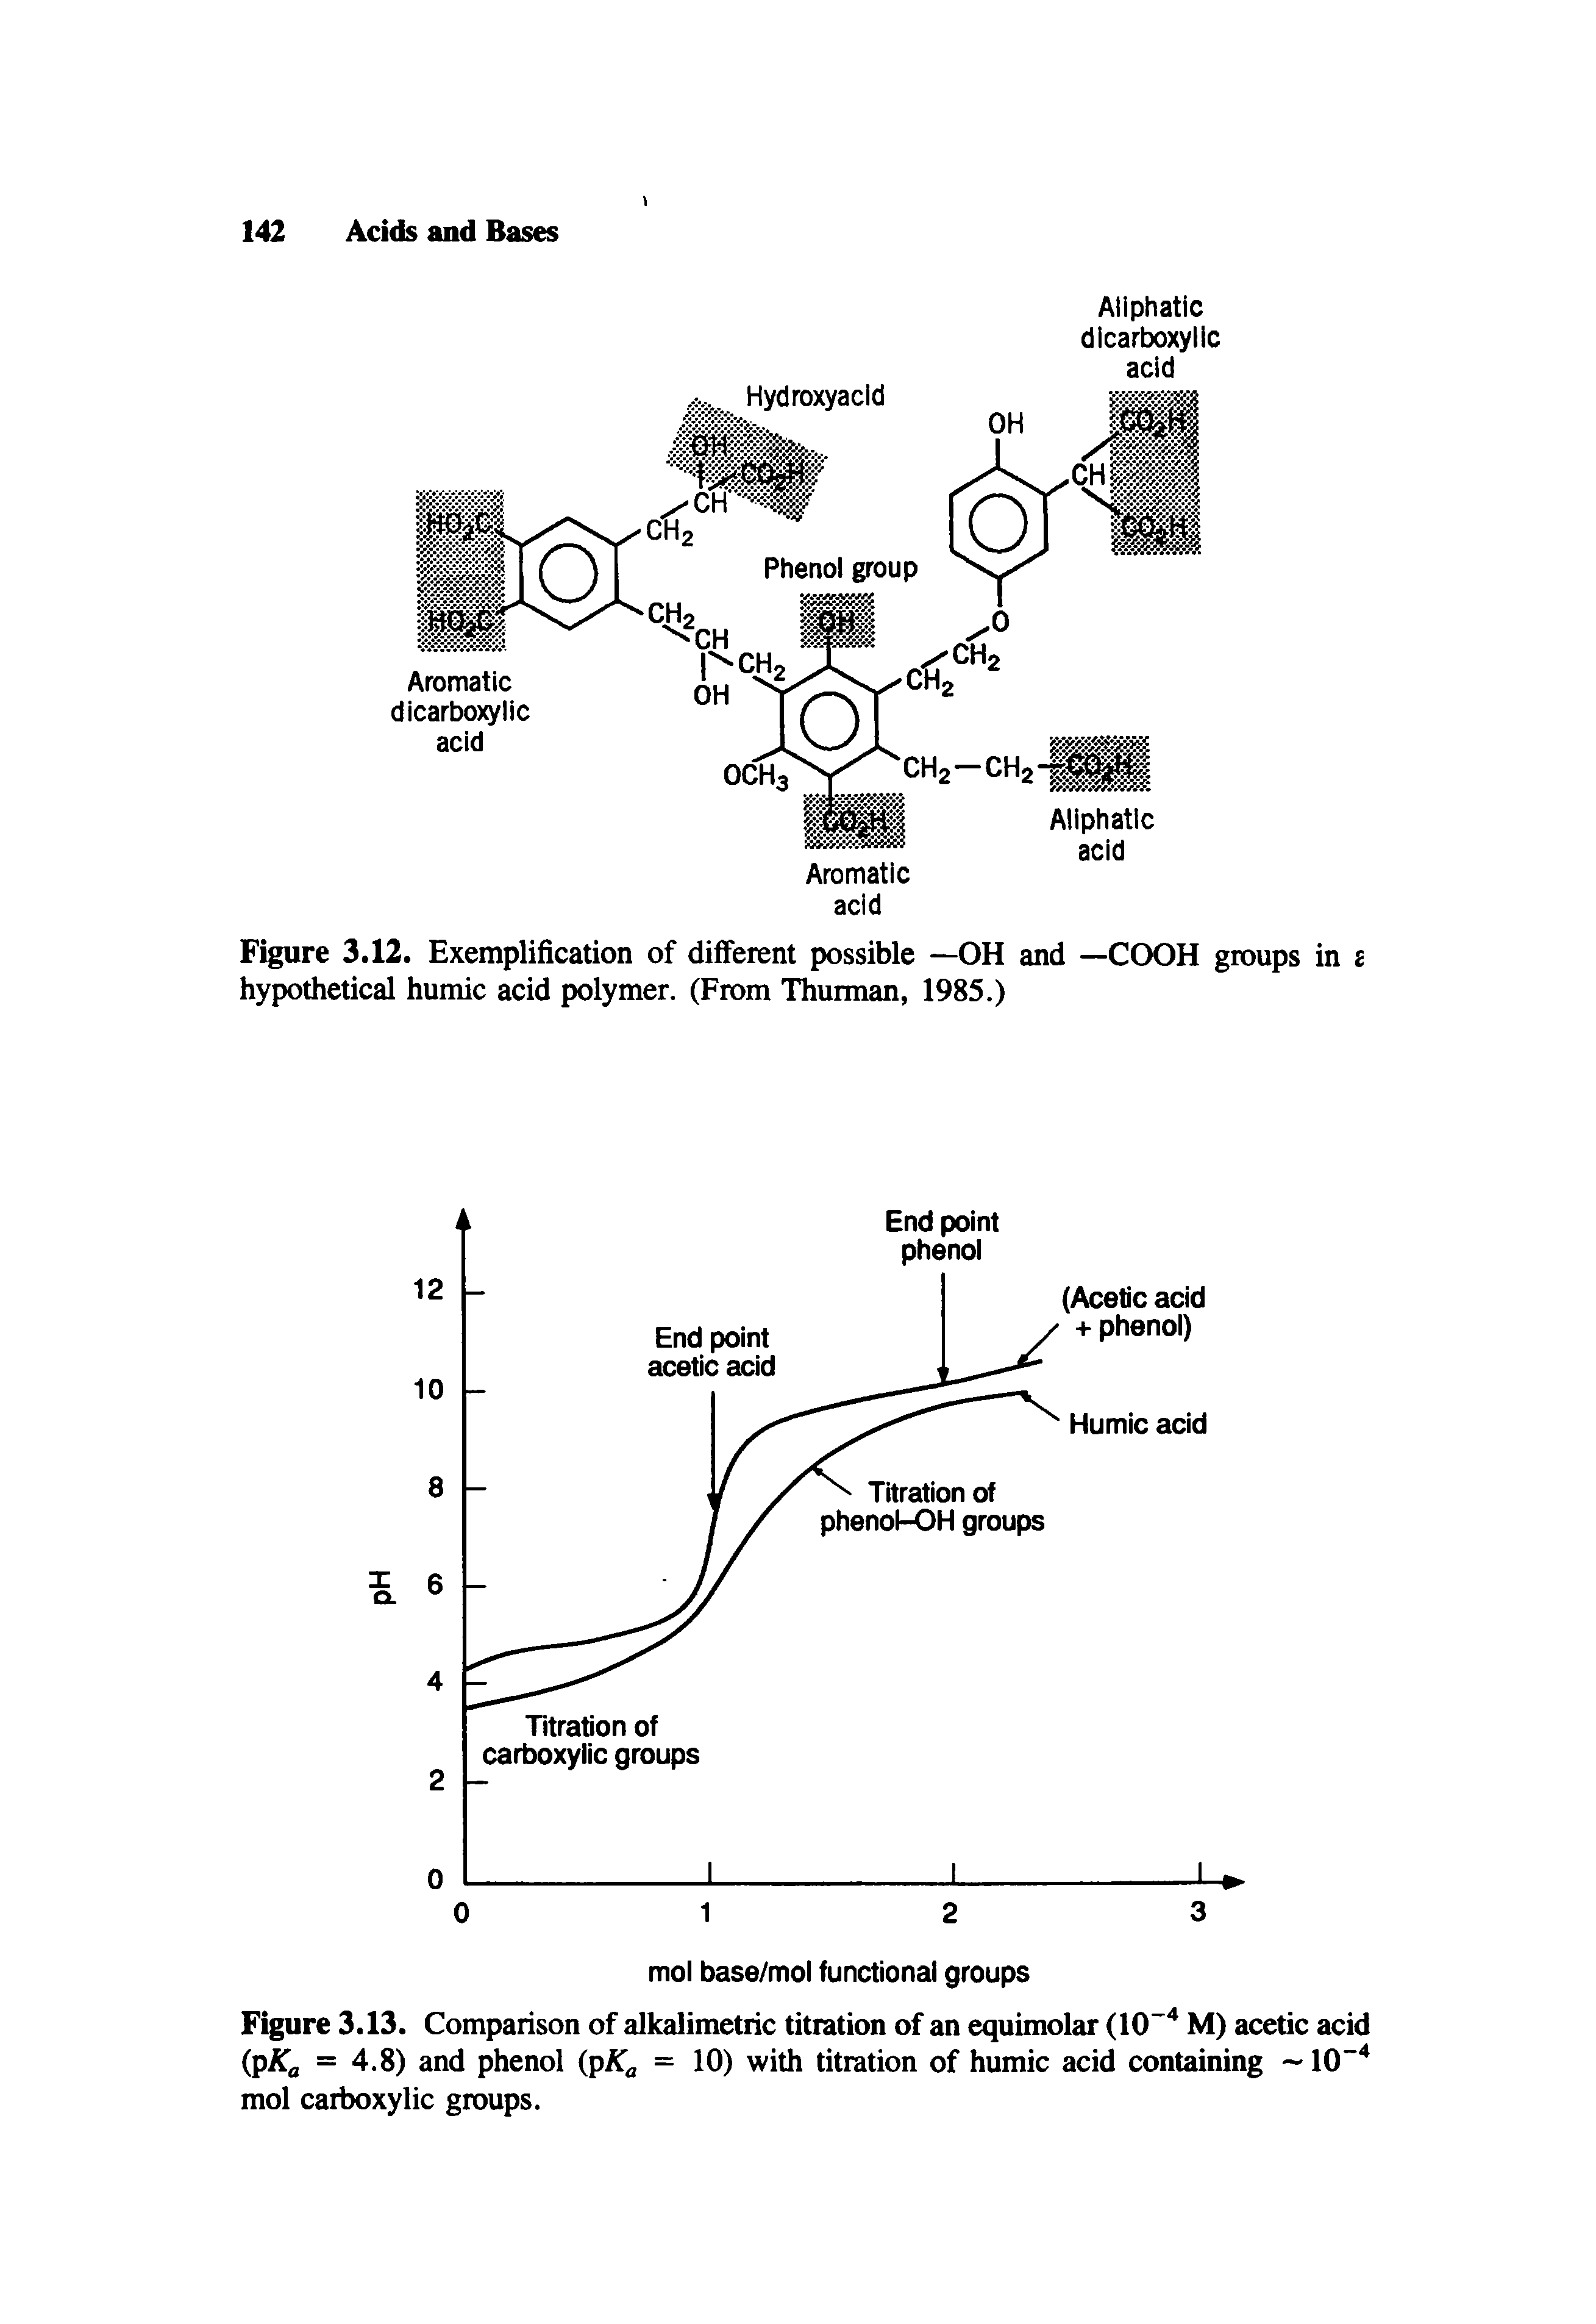 Figure 3.13. Comparison of alkalimetric titration of an equimolar (10 M) acetic acid (pKa = 4.8) and phenol (p = 10) with titration of humic acid containing 10 mol carboxylic groups.